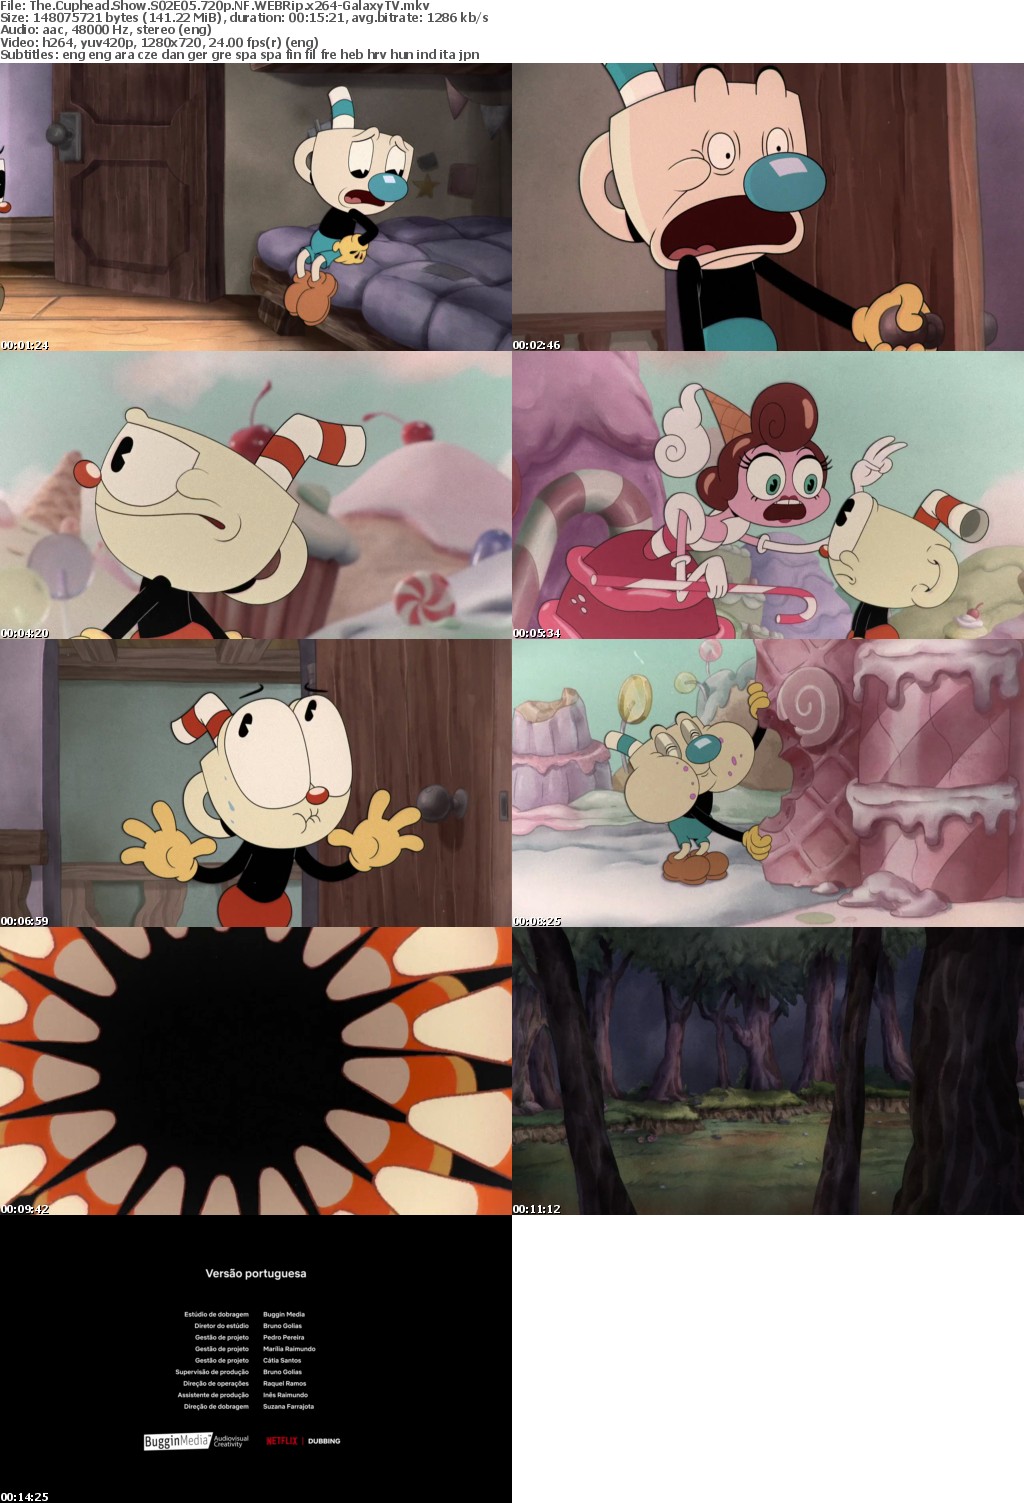 The Cuphead Show S02 COMPLETE 720p NF WEBRip x264-GalaxyTV